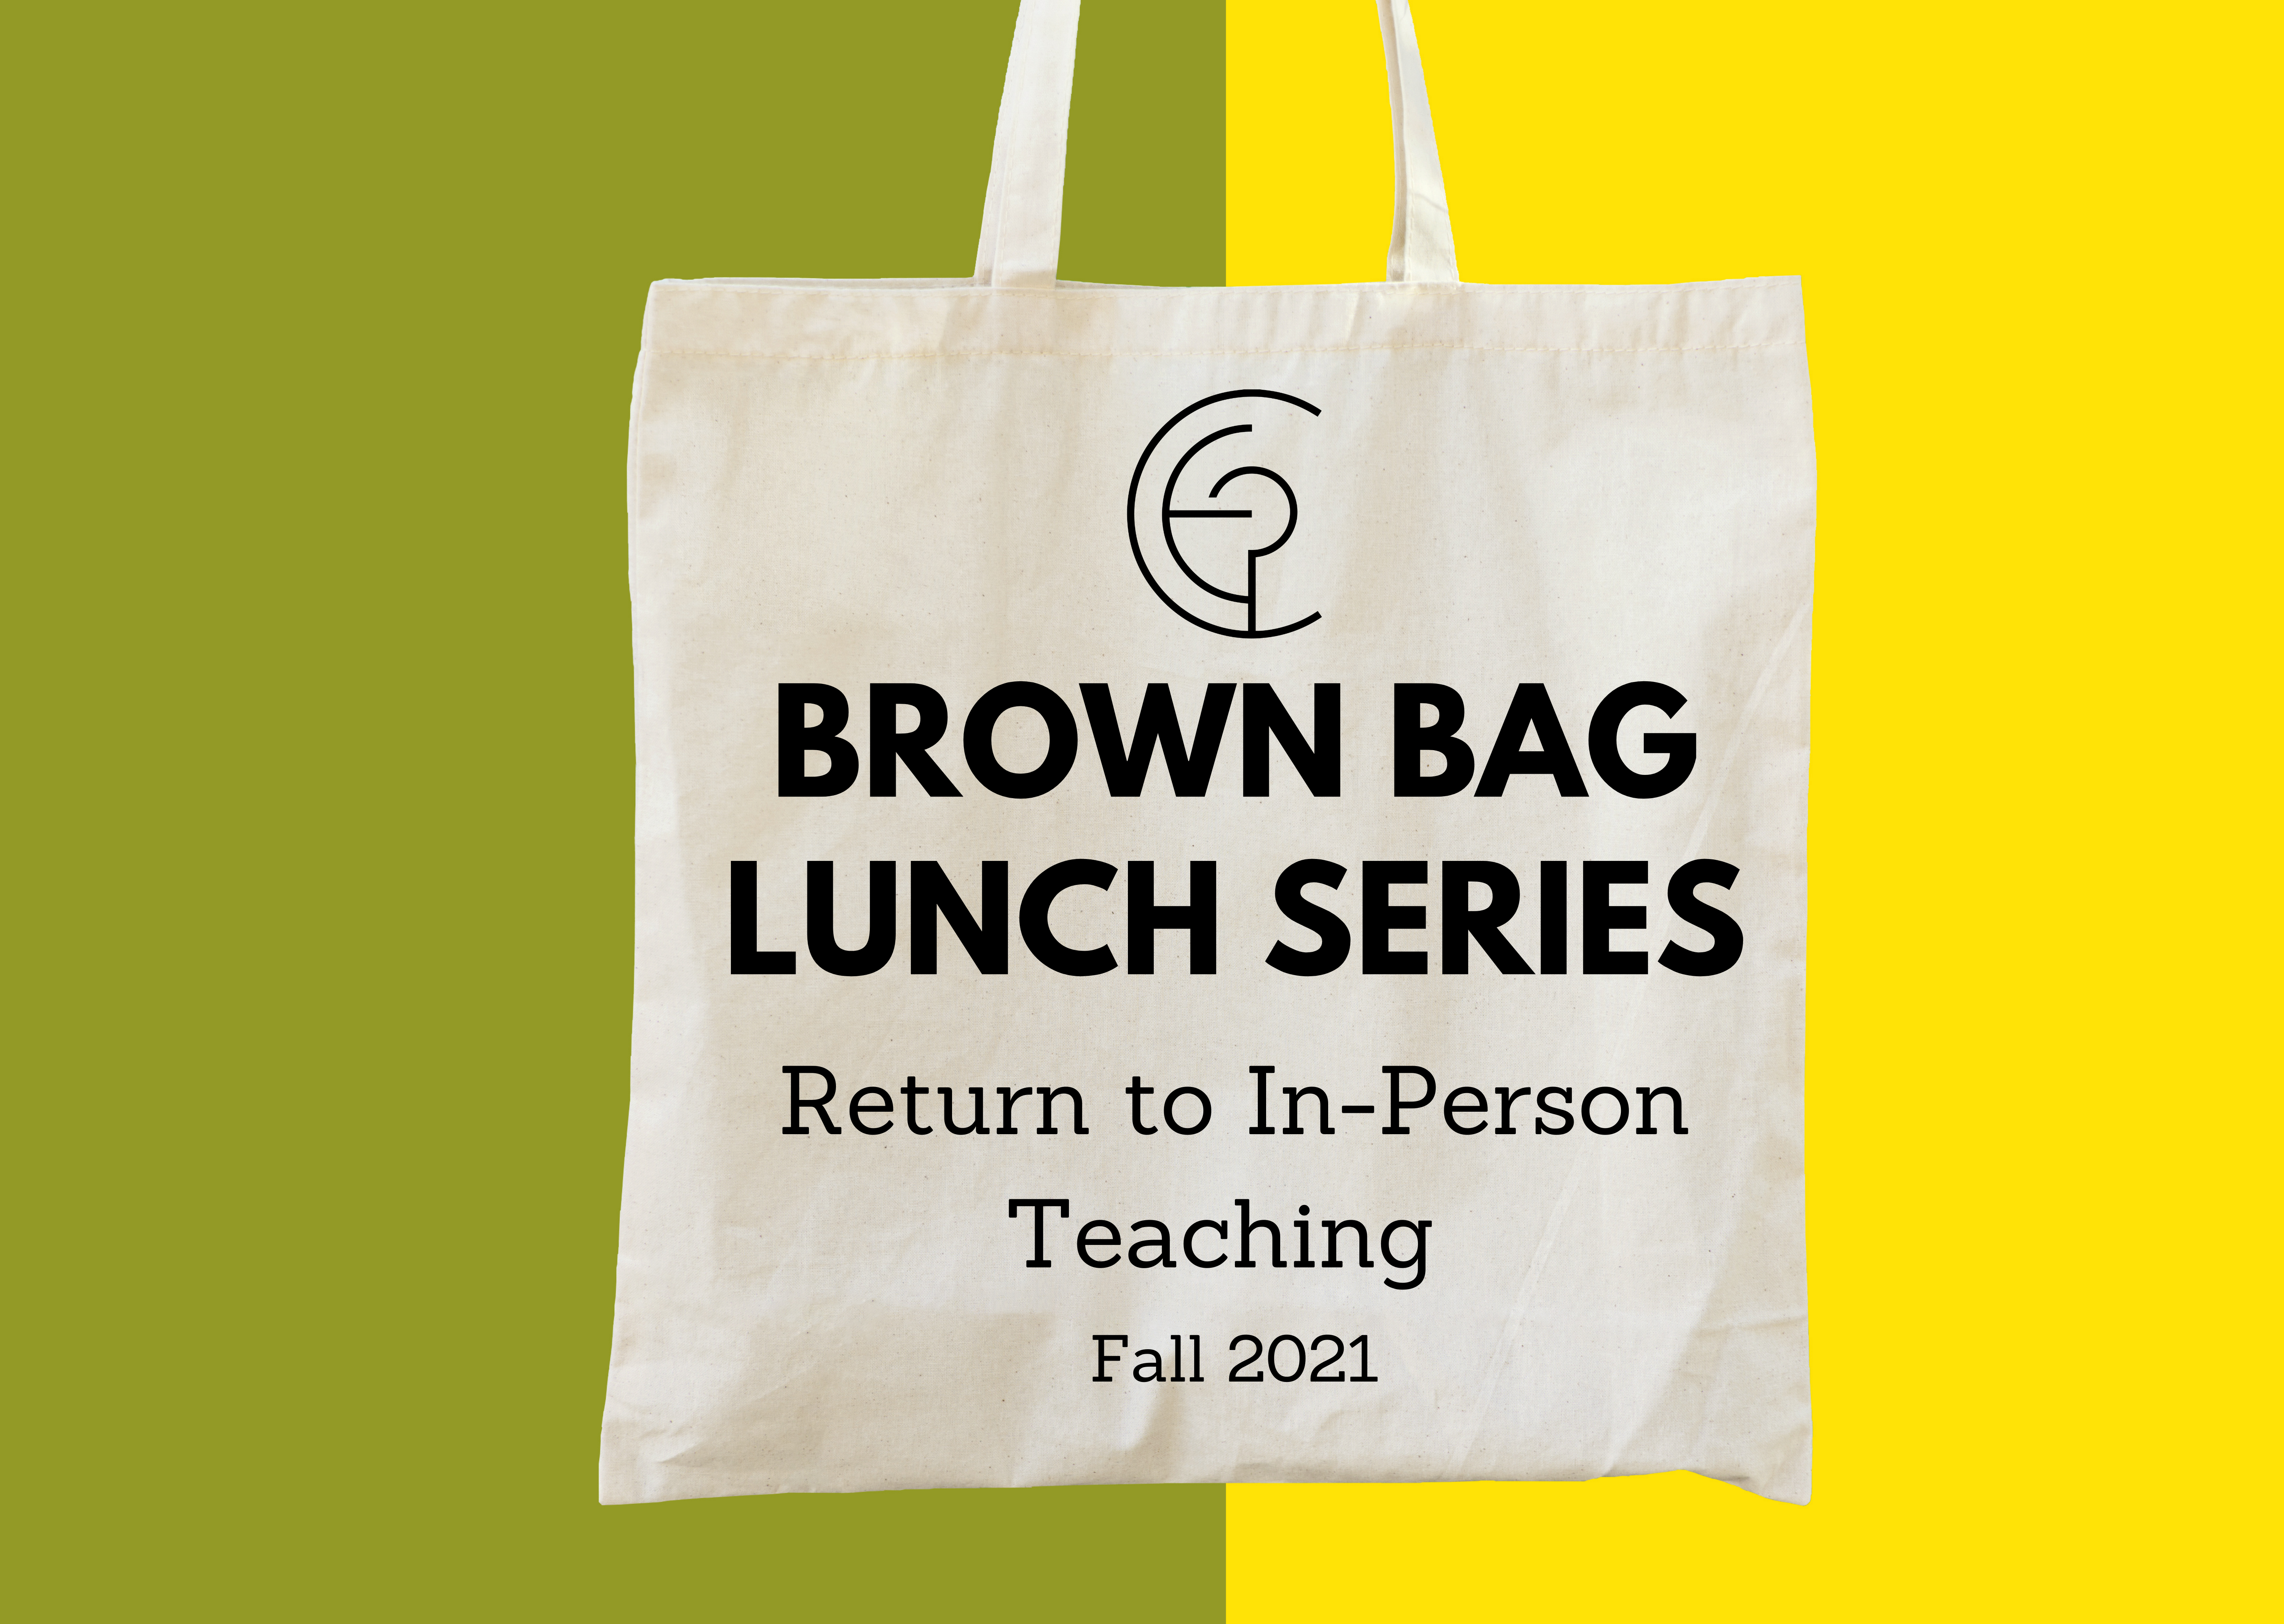 Brown tote bag with "Brown Bag Lunch Series" printed in black text.